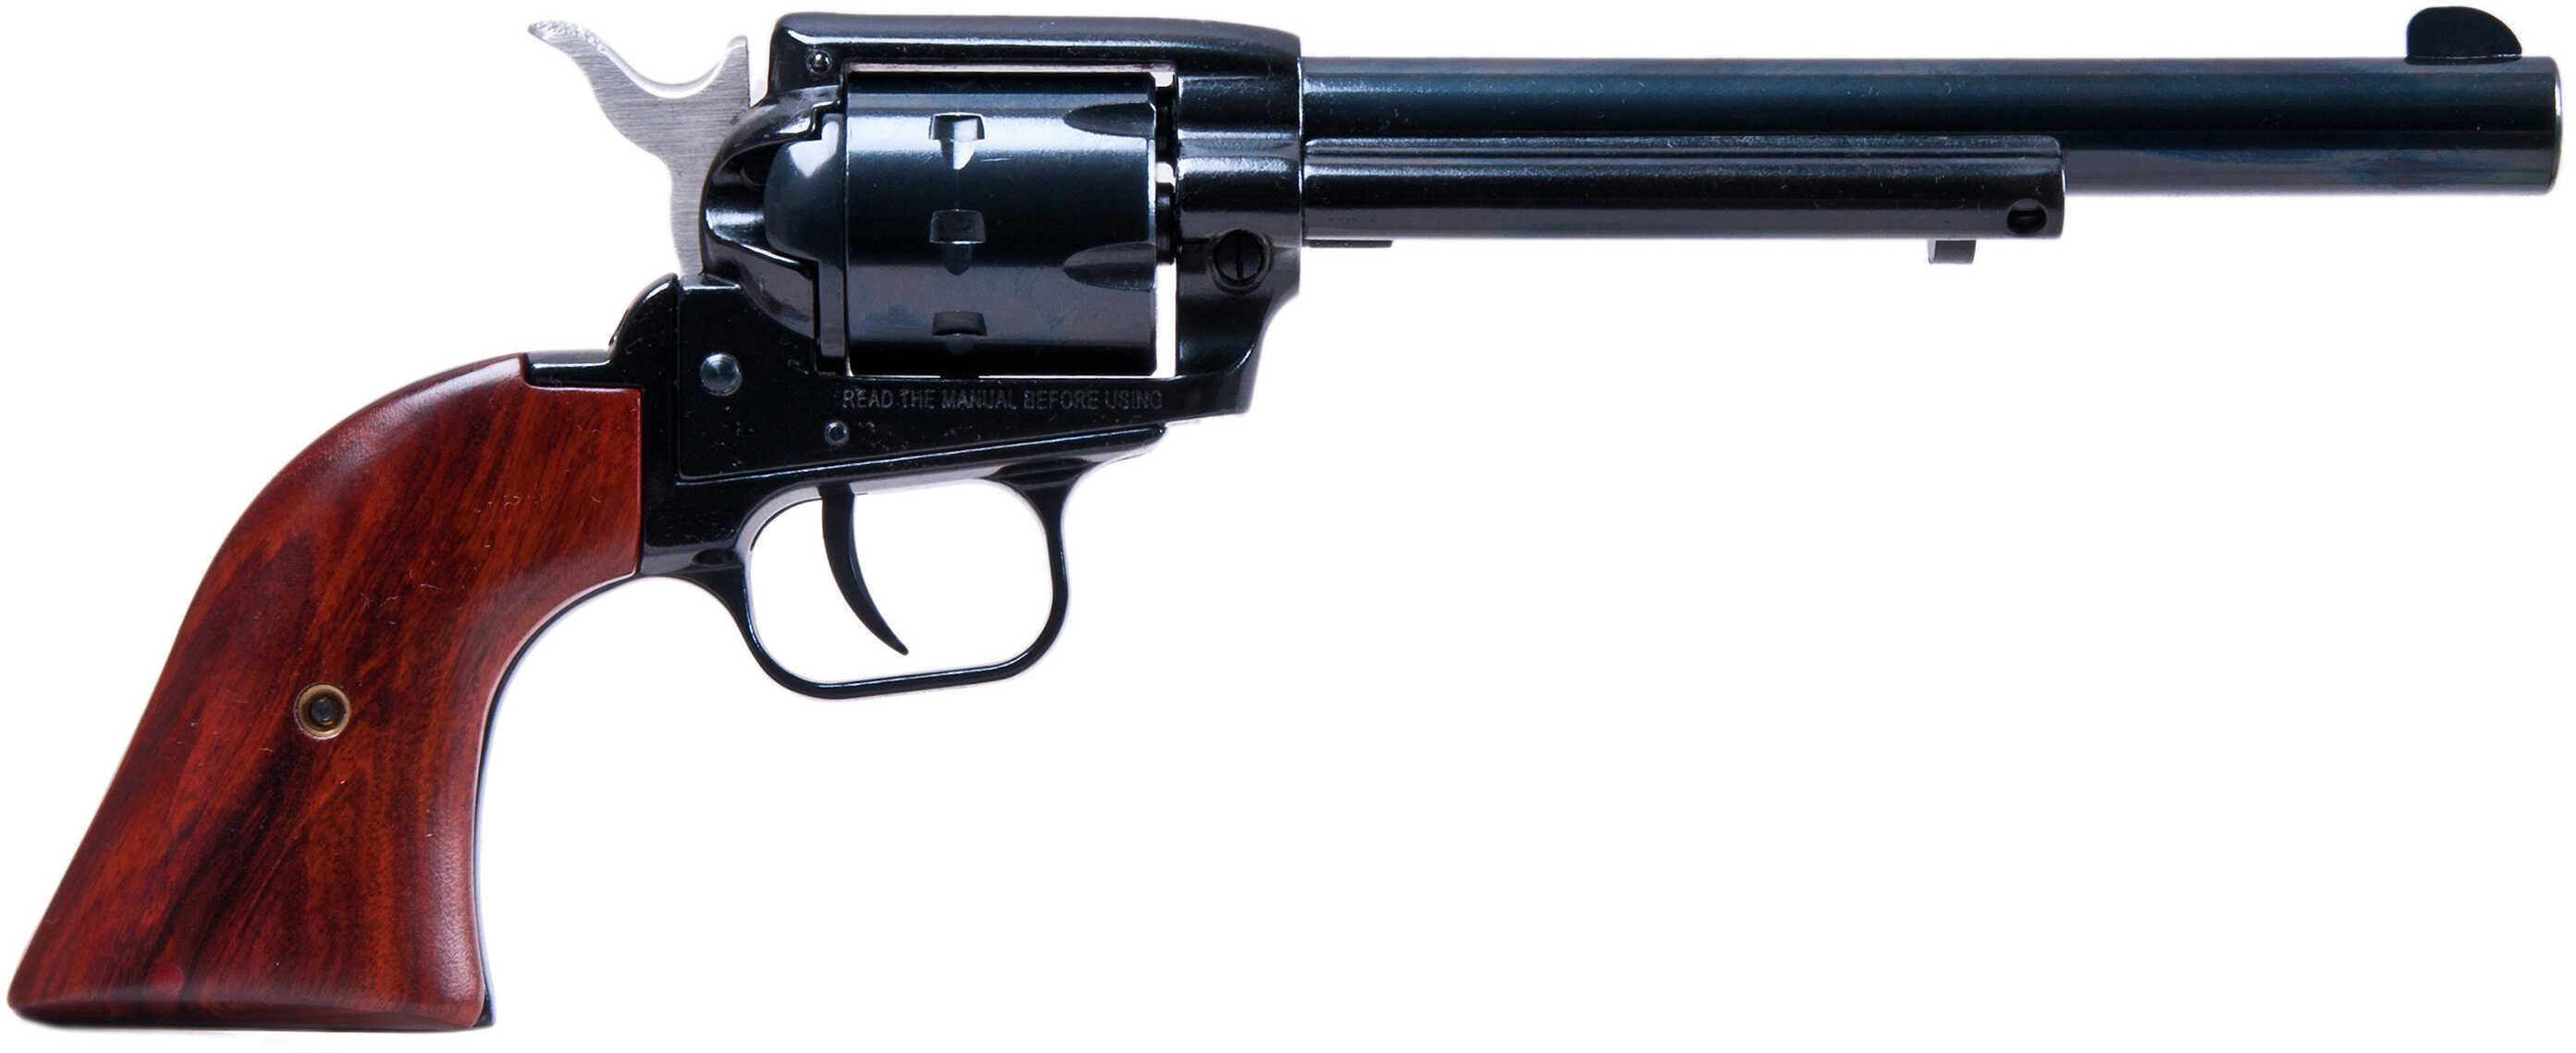 Heritage Rough Rider 22 Long Rifle / 22 Magnum 6.5" Barrel 9 Round Alloy Blued Revolver RR22999MB6